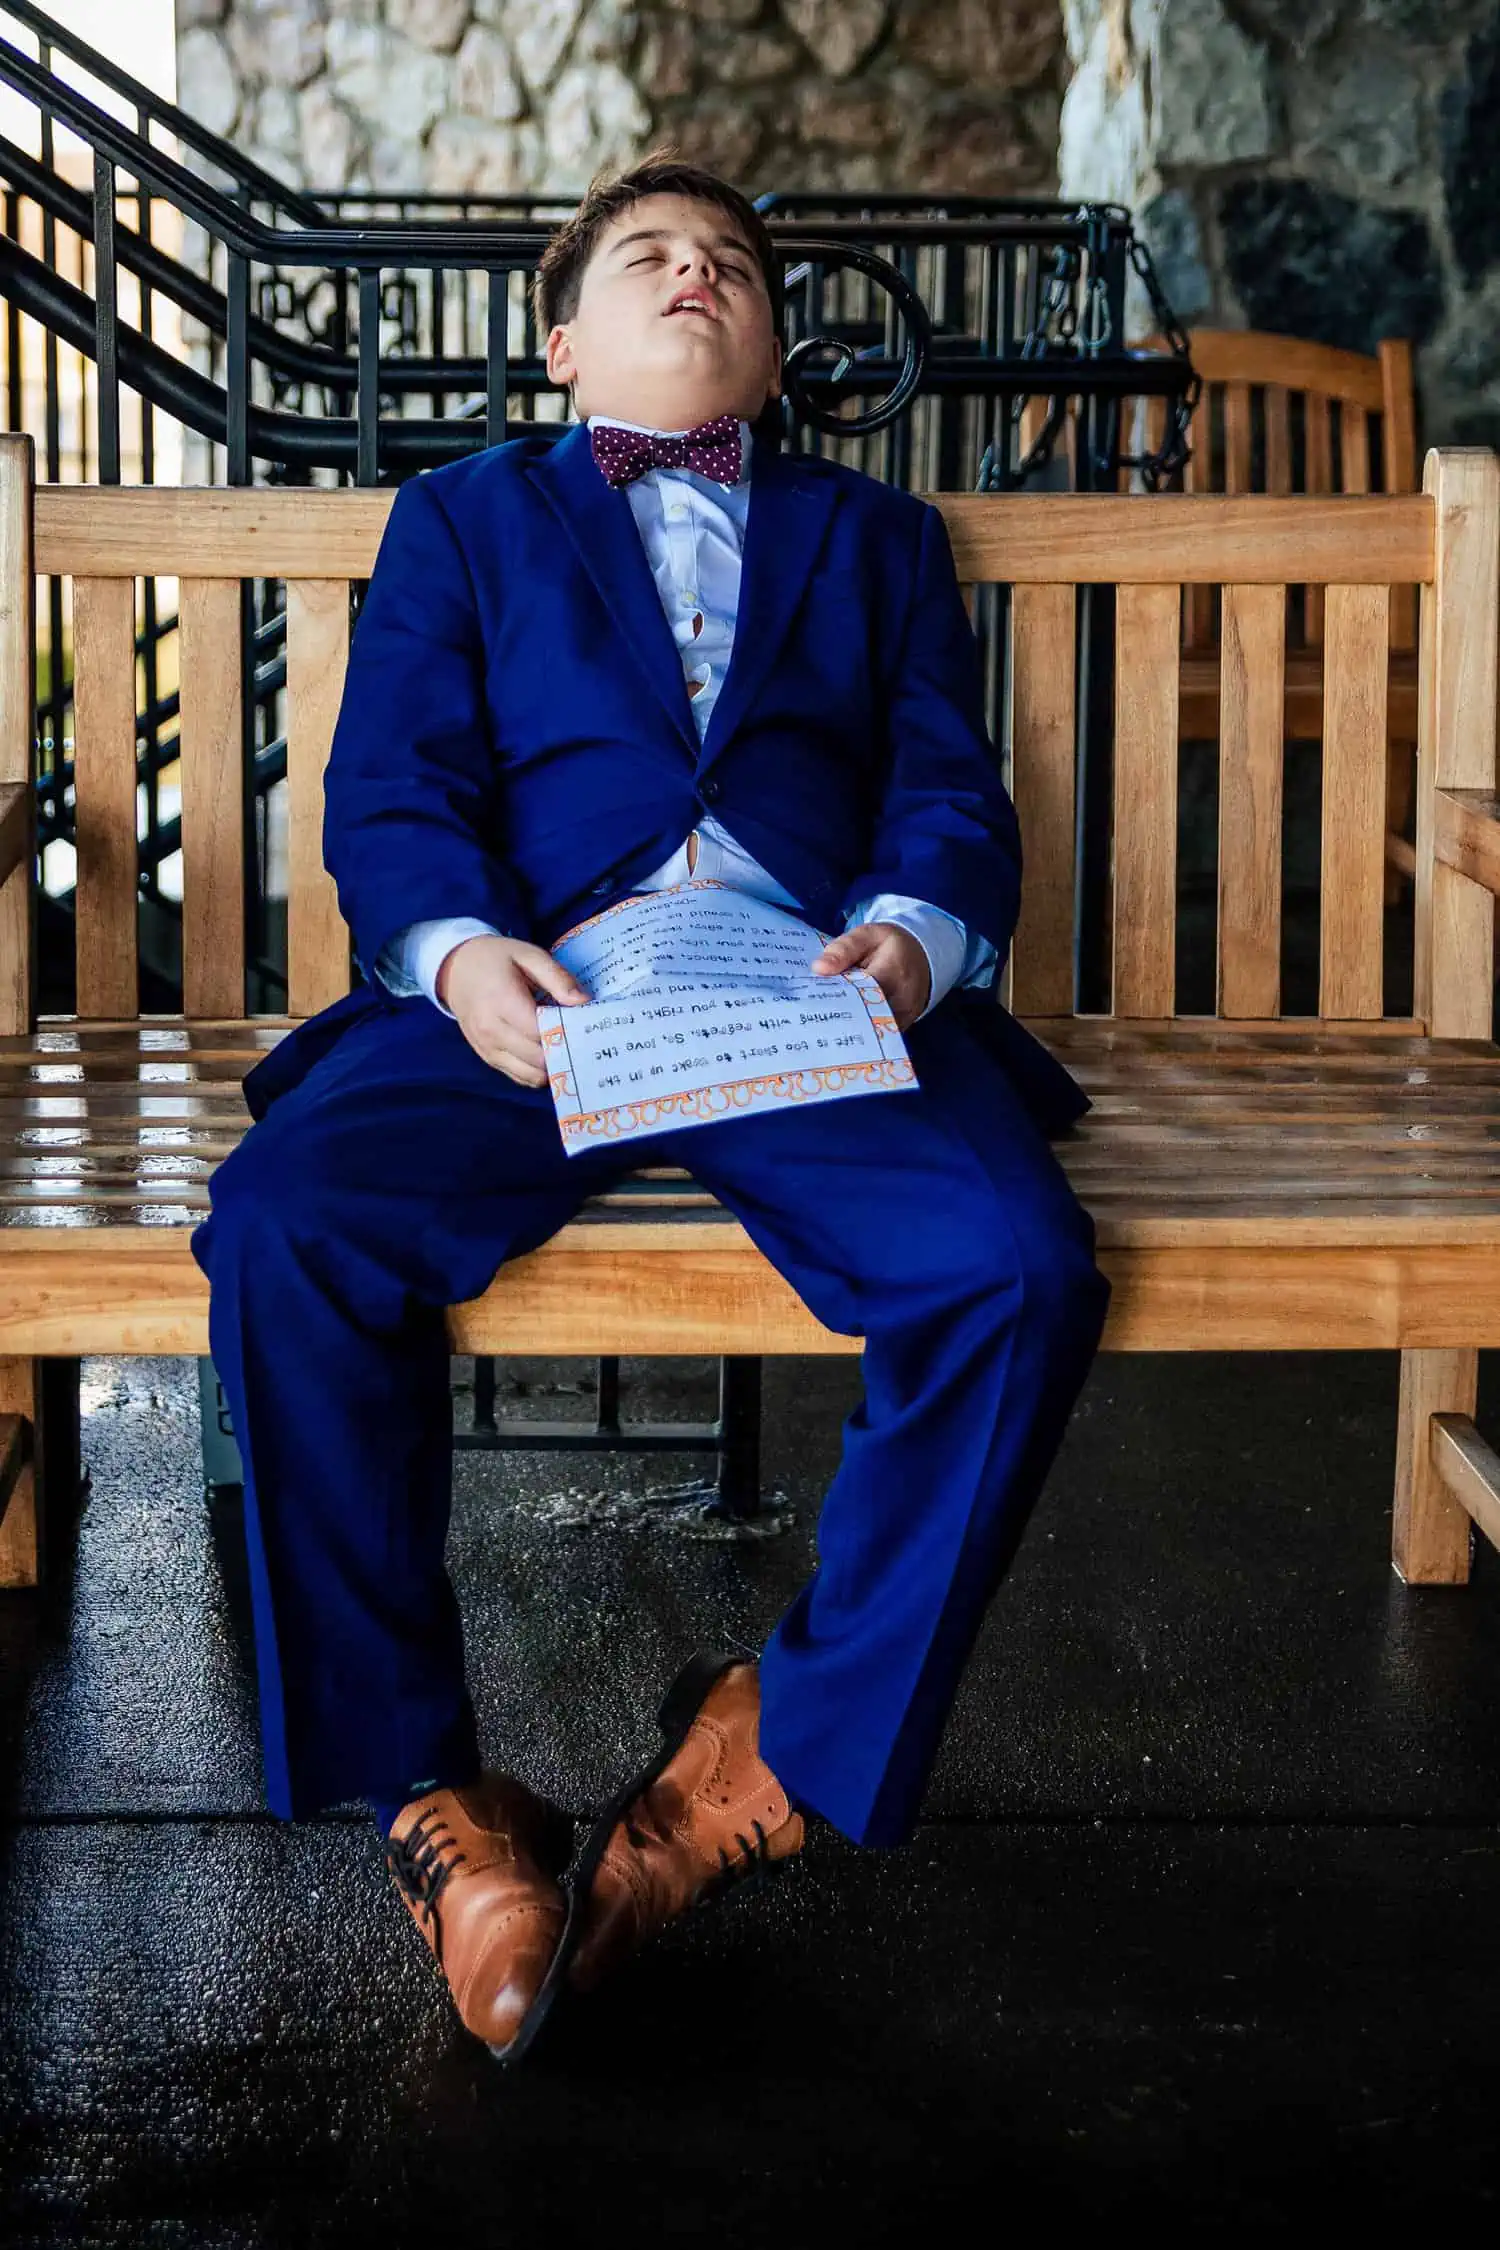 A boy in a blue suit sitting on a wooden bench.